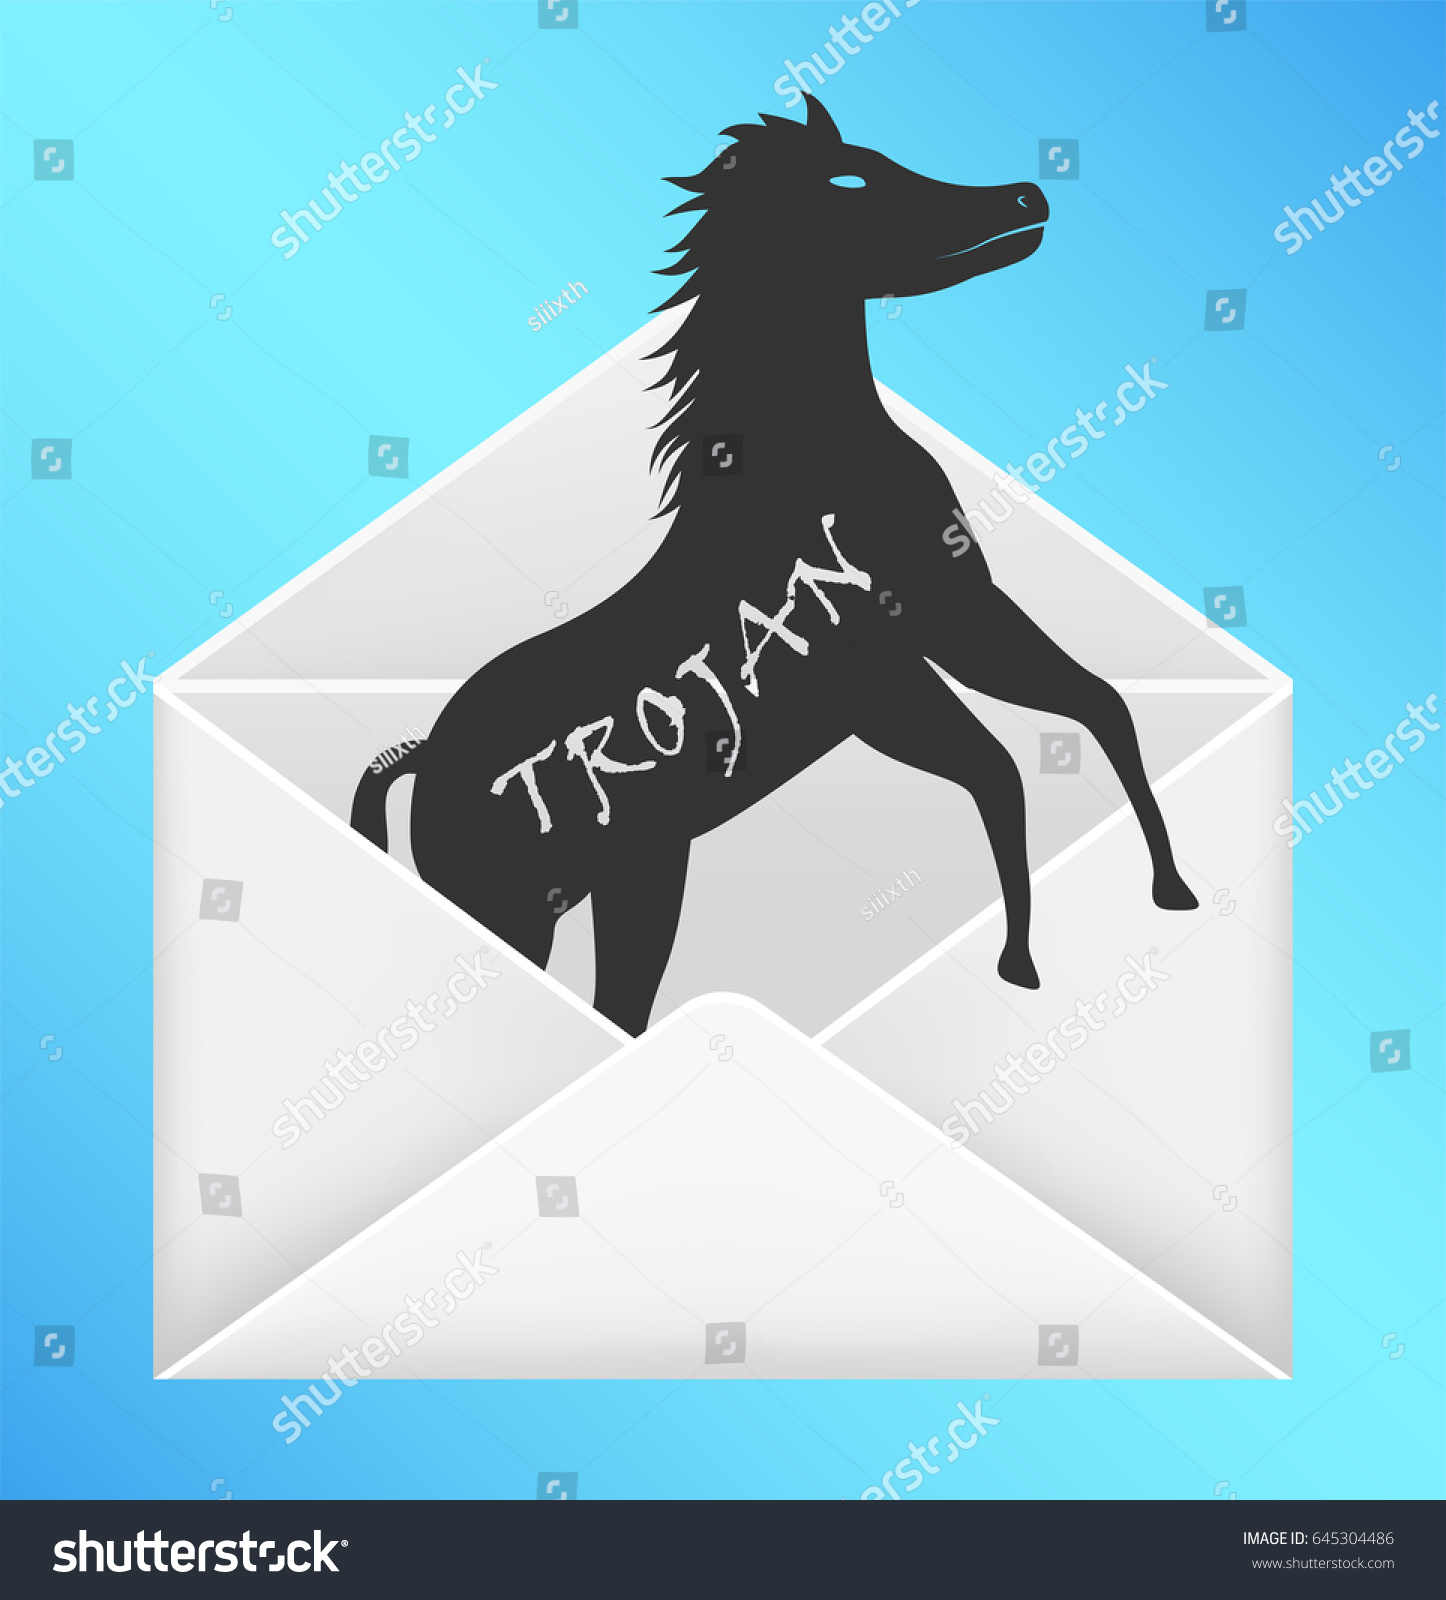 email trojan horse